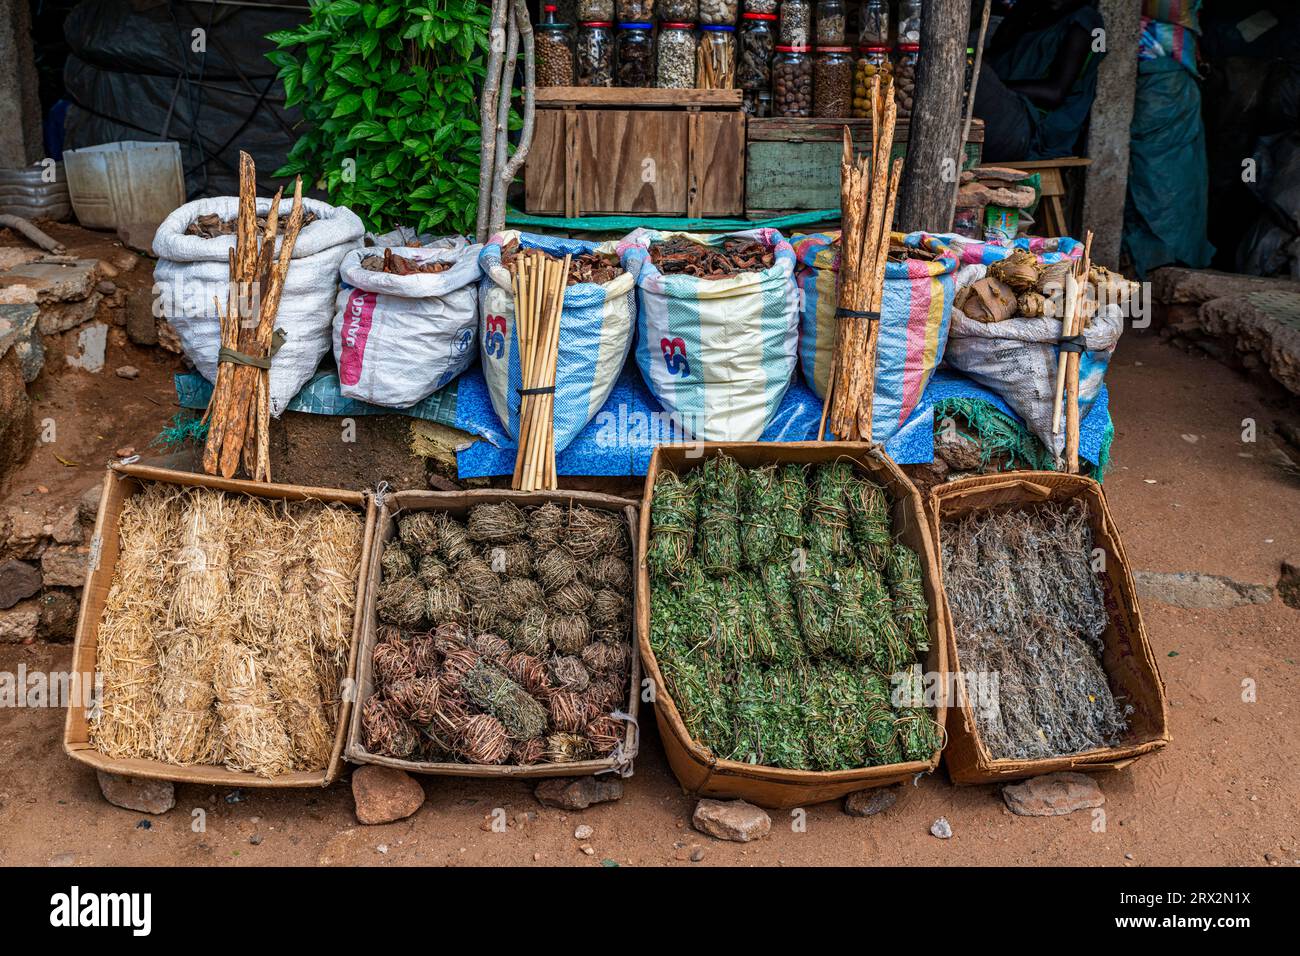 Local roots and leaves, traditional medicine market, Garoua, Northern Cameroon, Africa Stock Photo